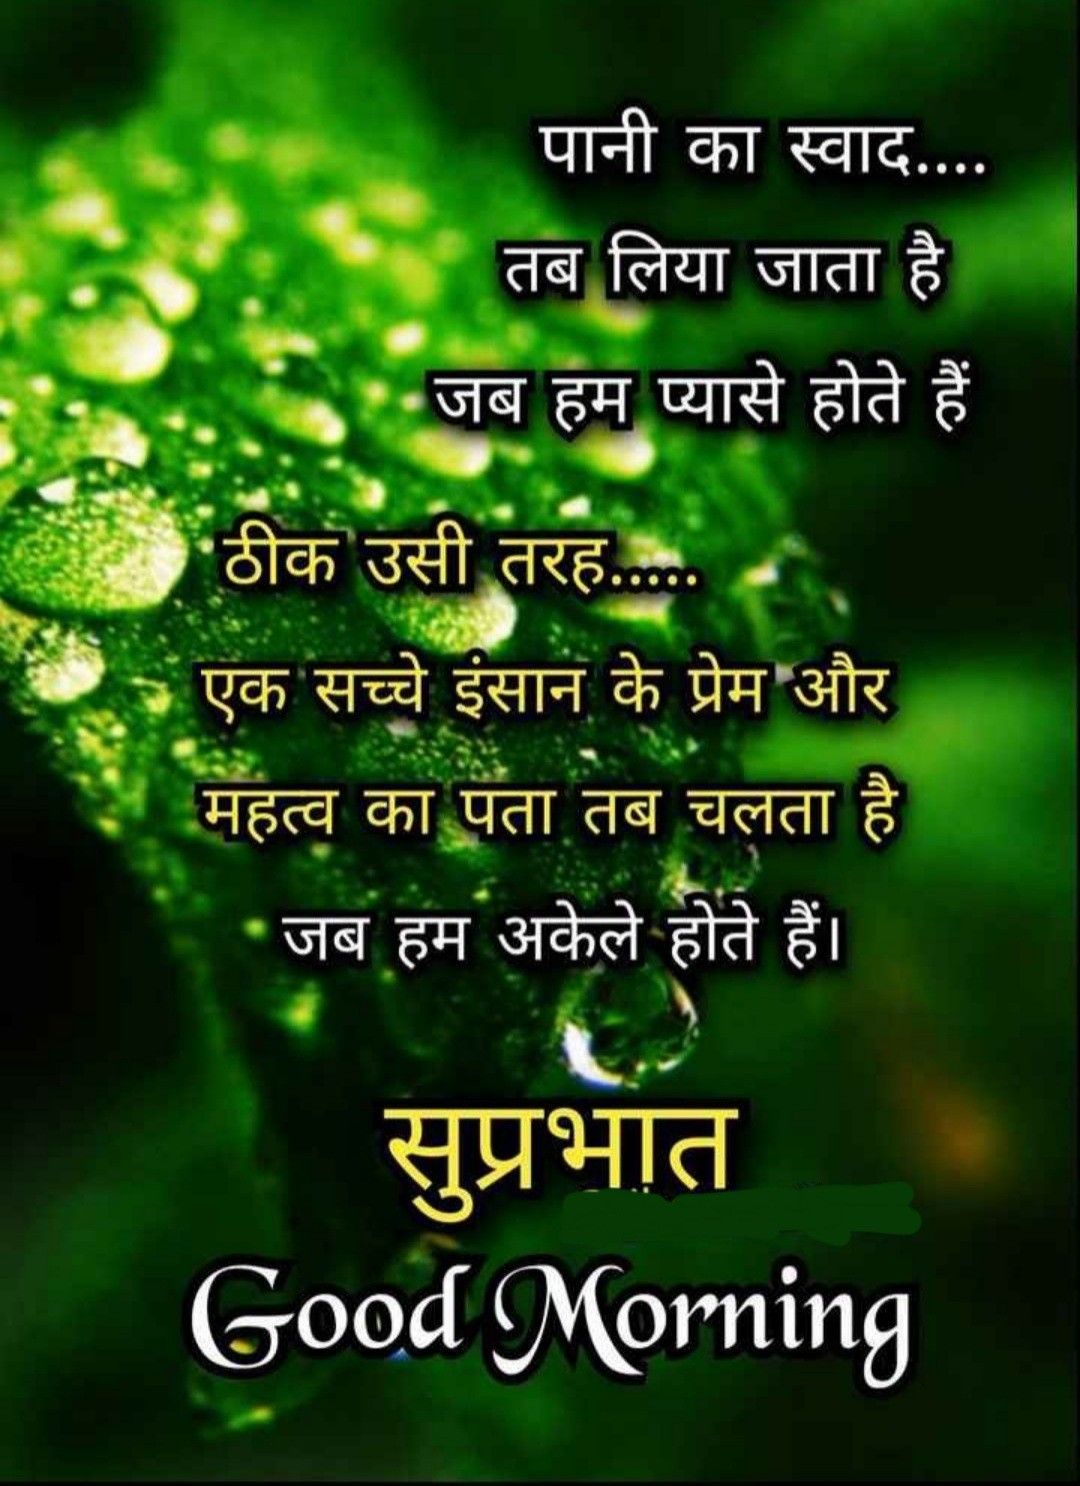 Good Morning Images with Quotes for Whatsapp in Hindi 2